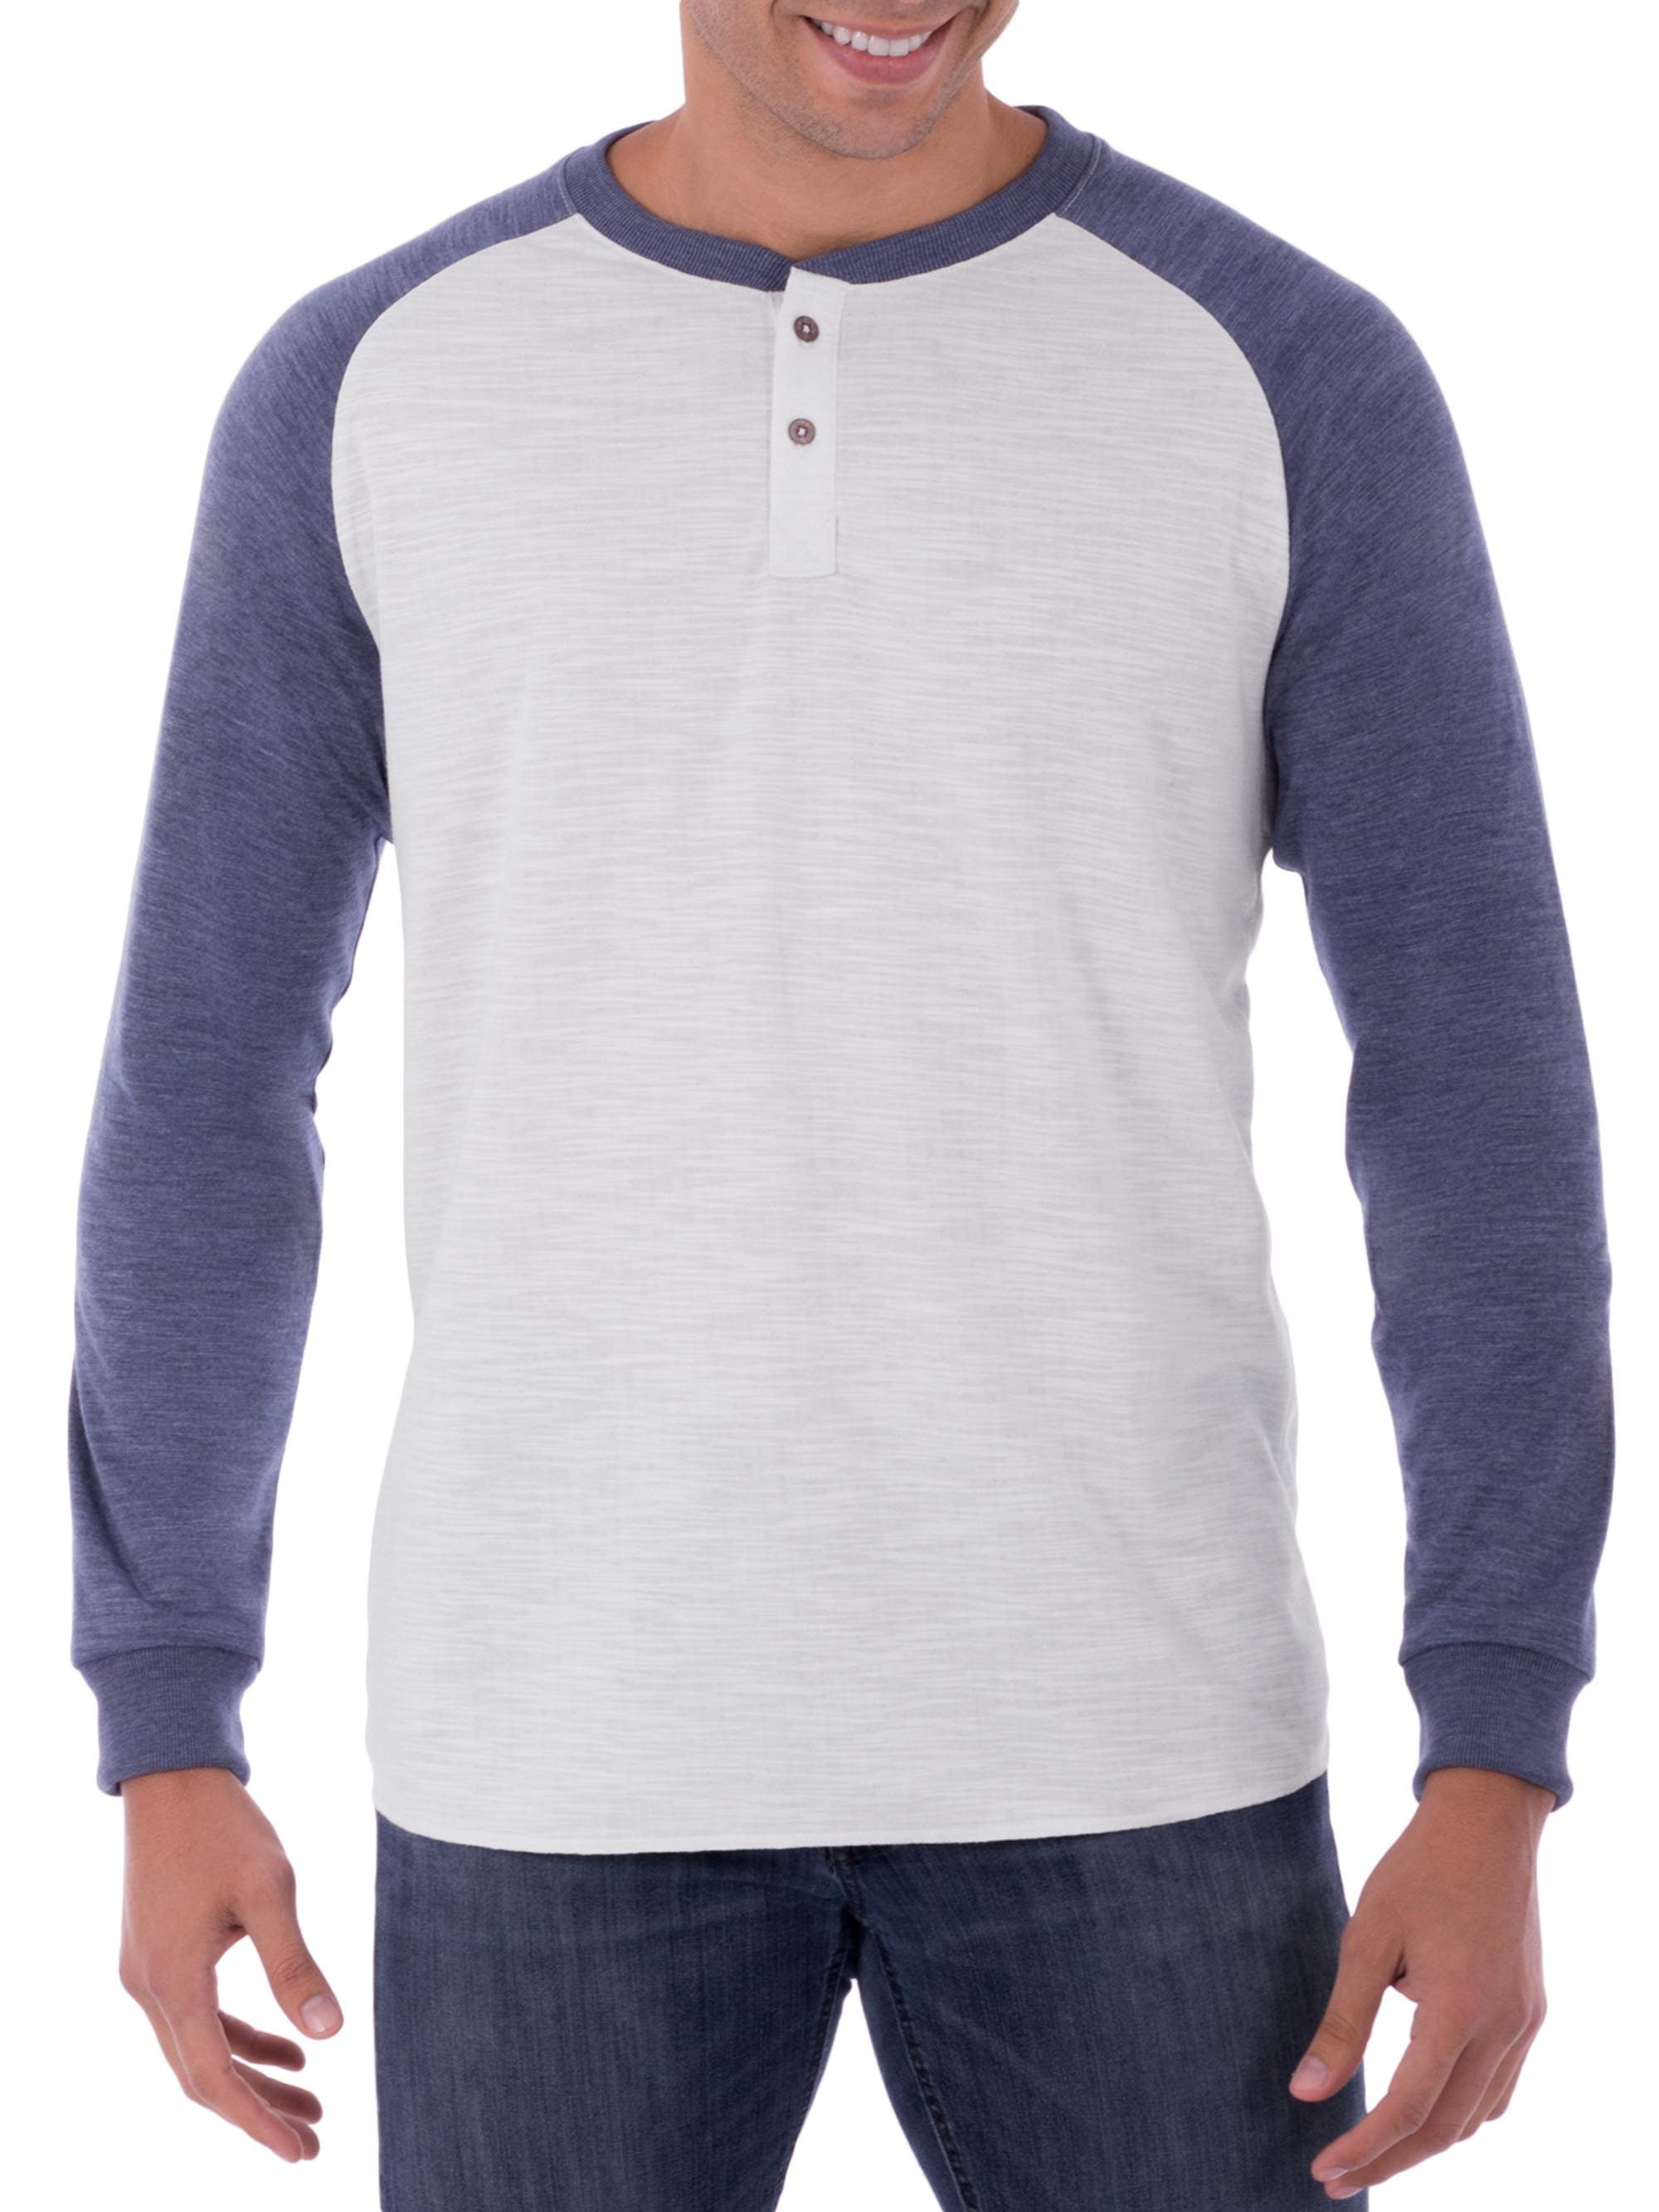 George Men's Long Sleeve Soft Double Knit Henley Raglan T-Shirt, Up to ...